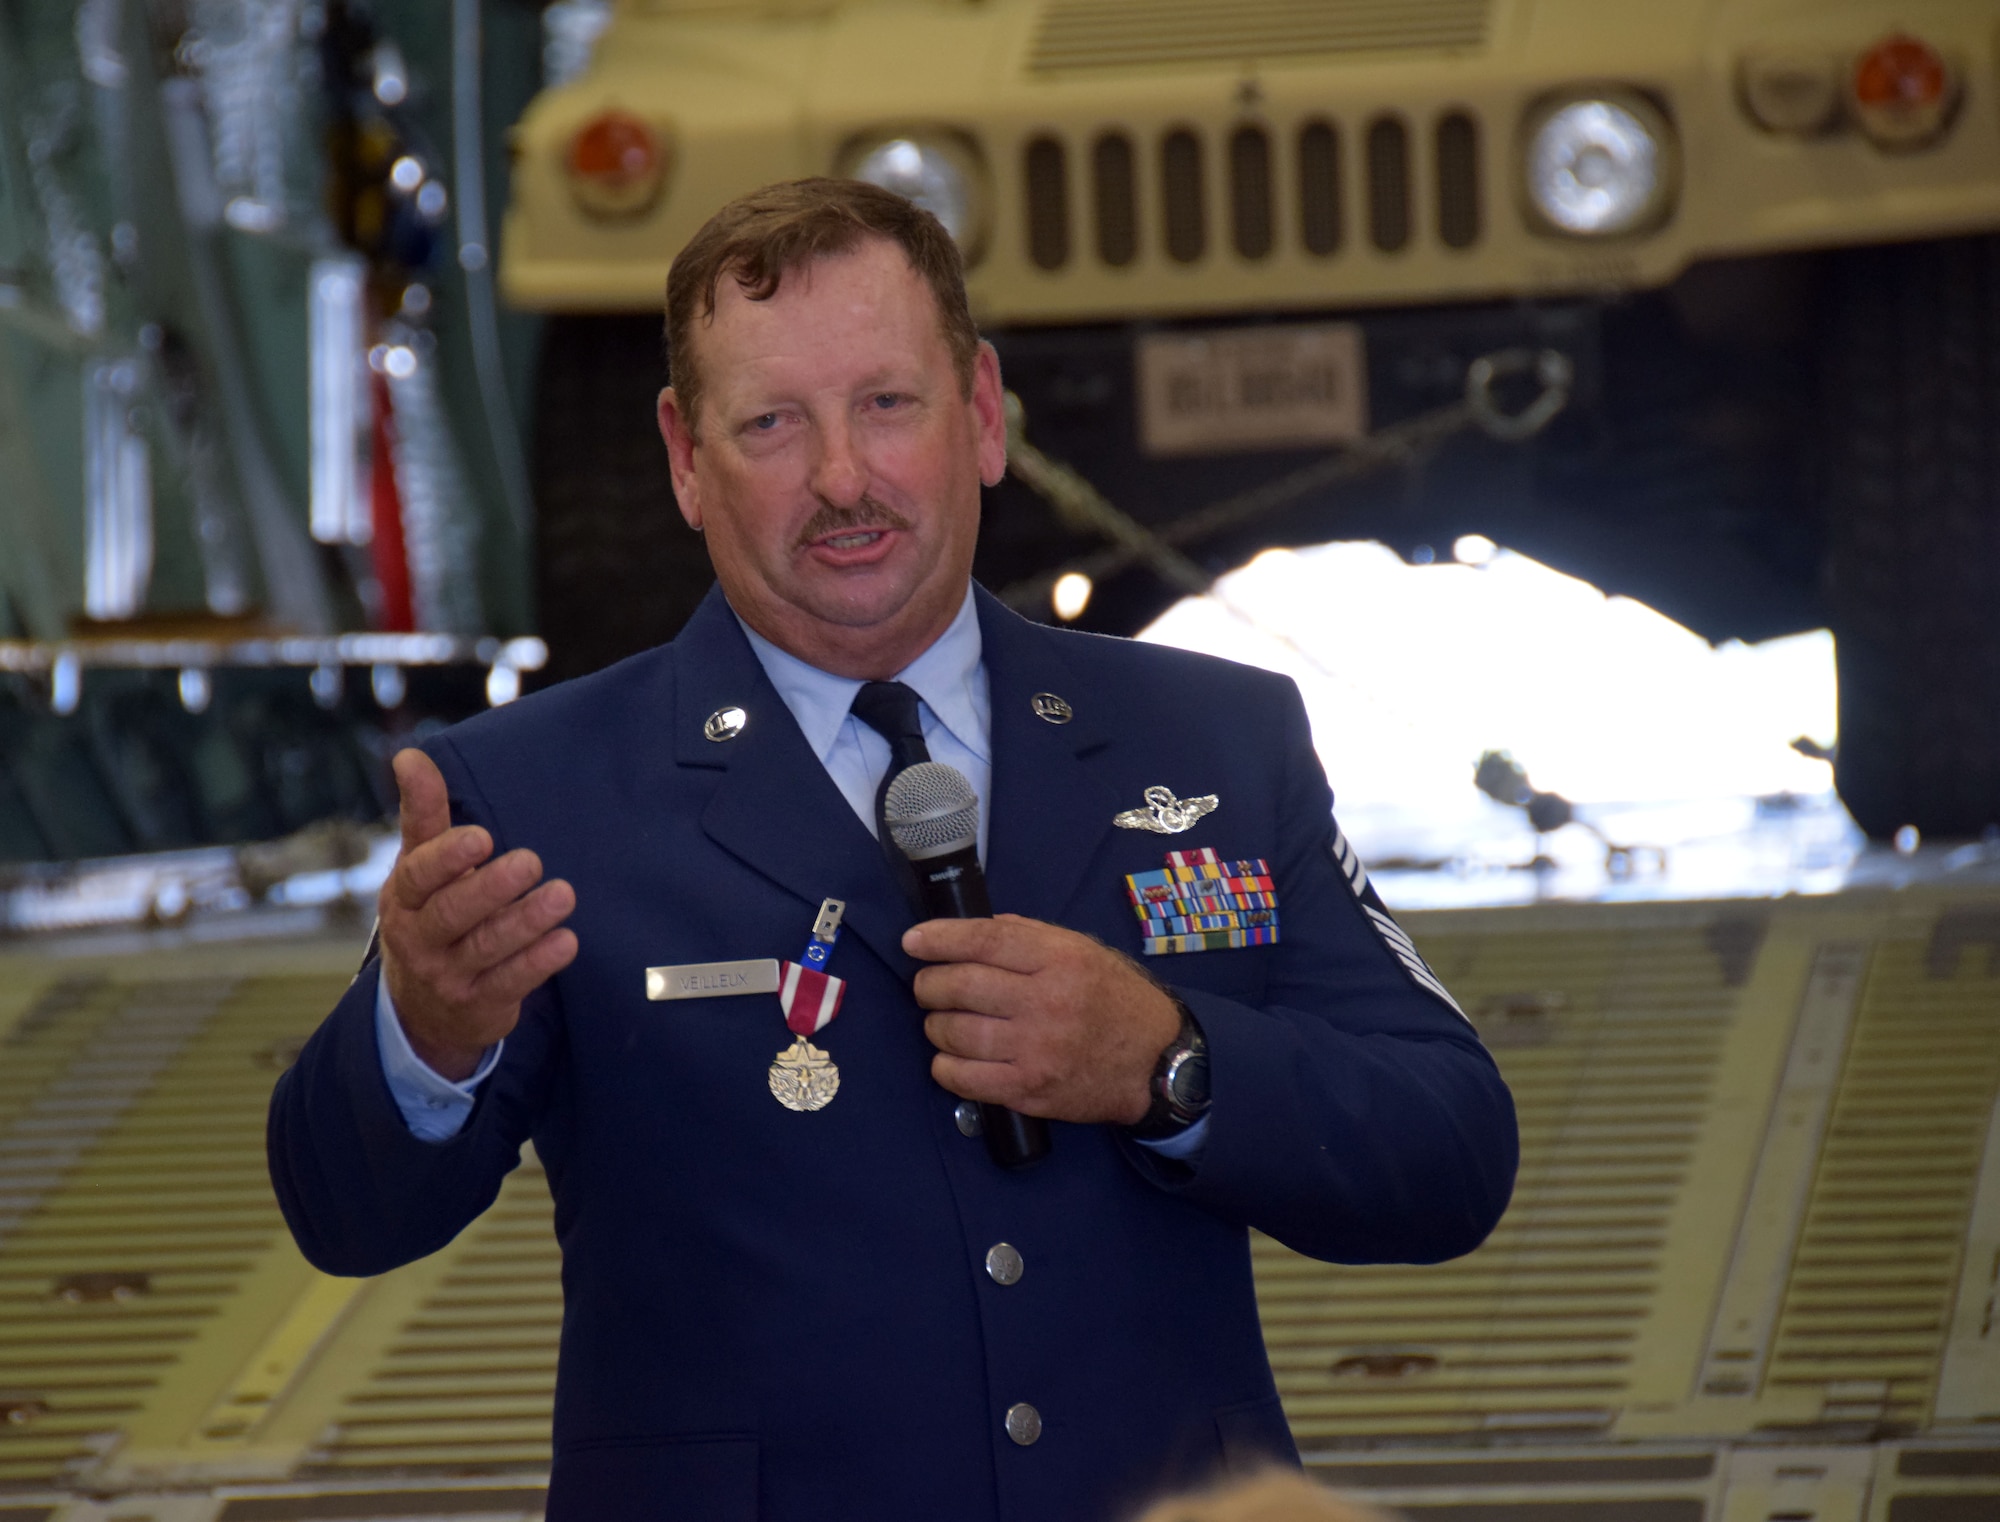 Chief Master Sgt. Thomas J. Veilleux Sr., 356th Airlift Squadron’s Formal Training Unit superintendent, speaks to the crowd during his retirement ceremony from the United States Air Force Reserve June 11, 2017 at the Cargo Loading Training Facility at Joint Base San Antonio-Lackland, Texas.  Chief Veilleux and his wife of 34 years Diane will continue to make their home in San Antonio. (U.S. Air Force photo by Tech. Sgt. Carlos J. Trevino)